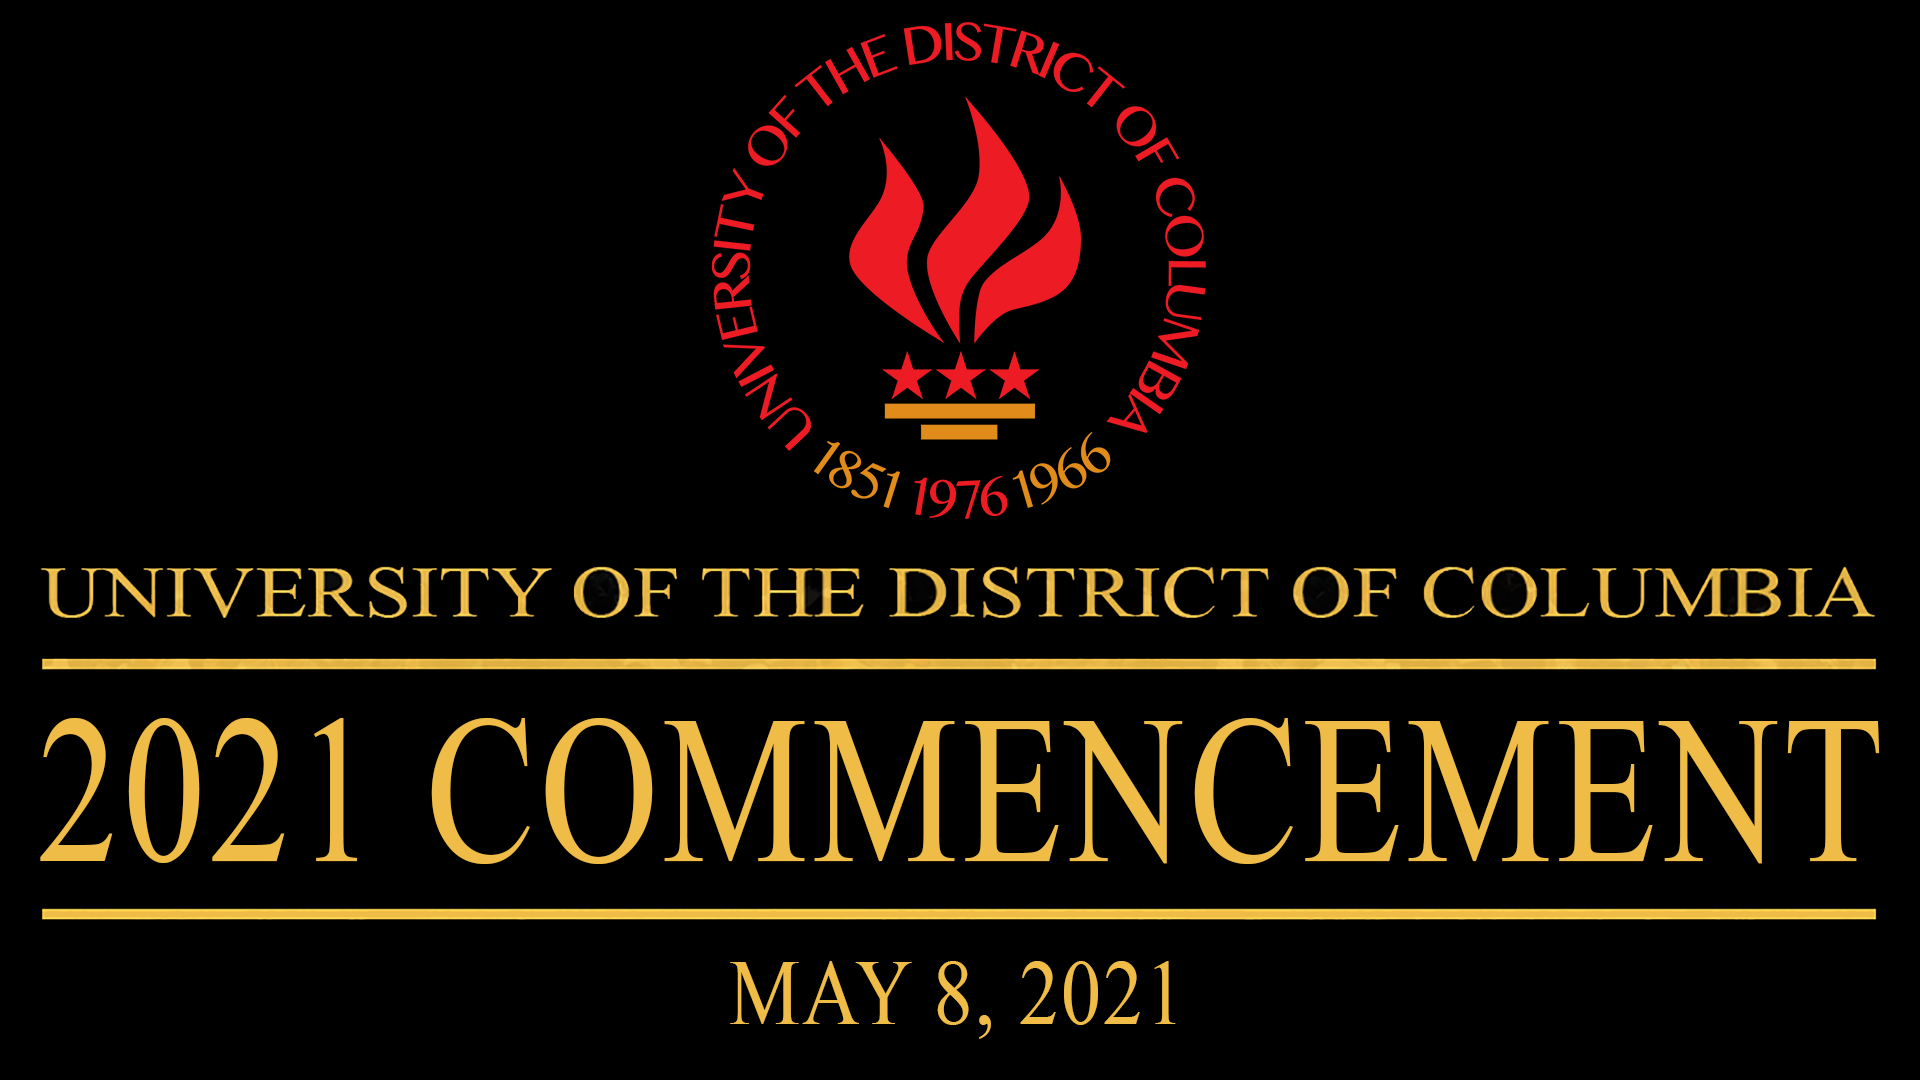 UDC 2021 Commencement will be shown LIVE tomorrow 5/8/21